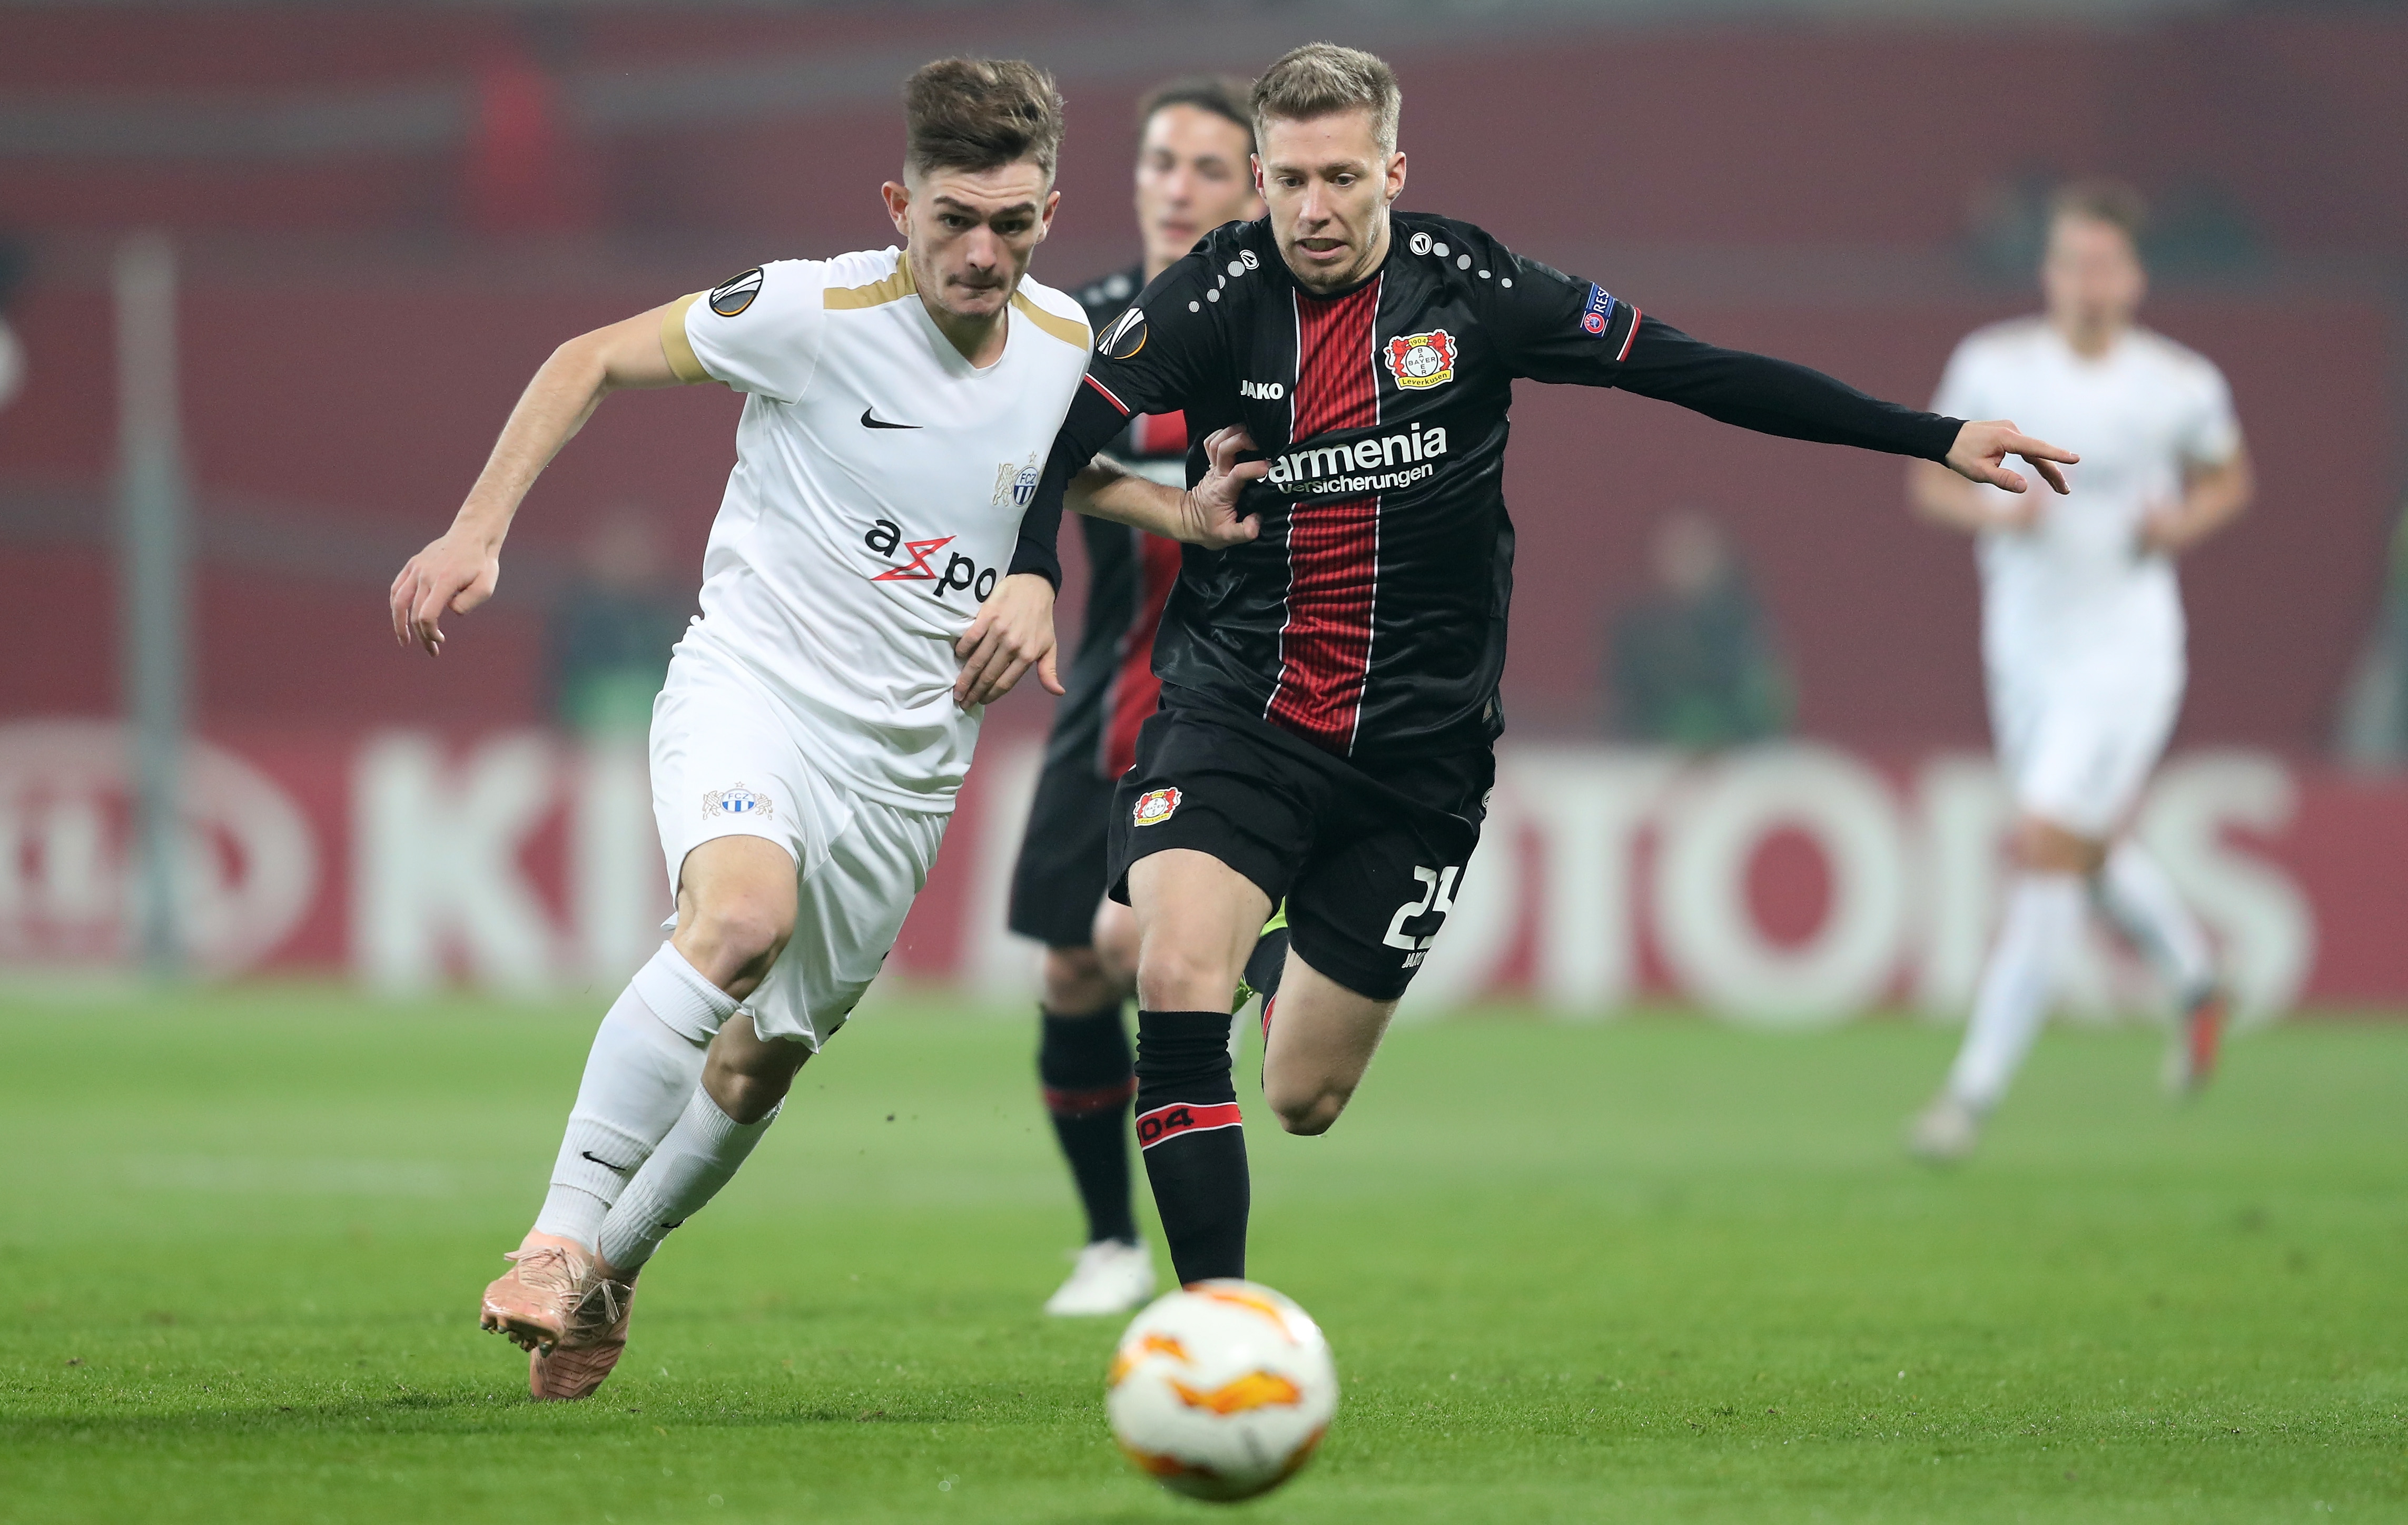 epa07151841 Zuerich's Toni Domgjoni in action with Leverkusen's Mitchell Weiser during the UEFA Europa League Group A soccer match between Bayer Leverkusen and FC Zuerich in Leverkusen, Germany, 08 November 2018.  EPA/FRIEDEMANN VOGEL